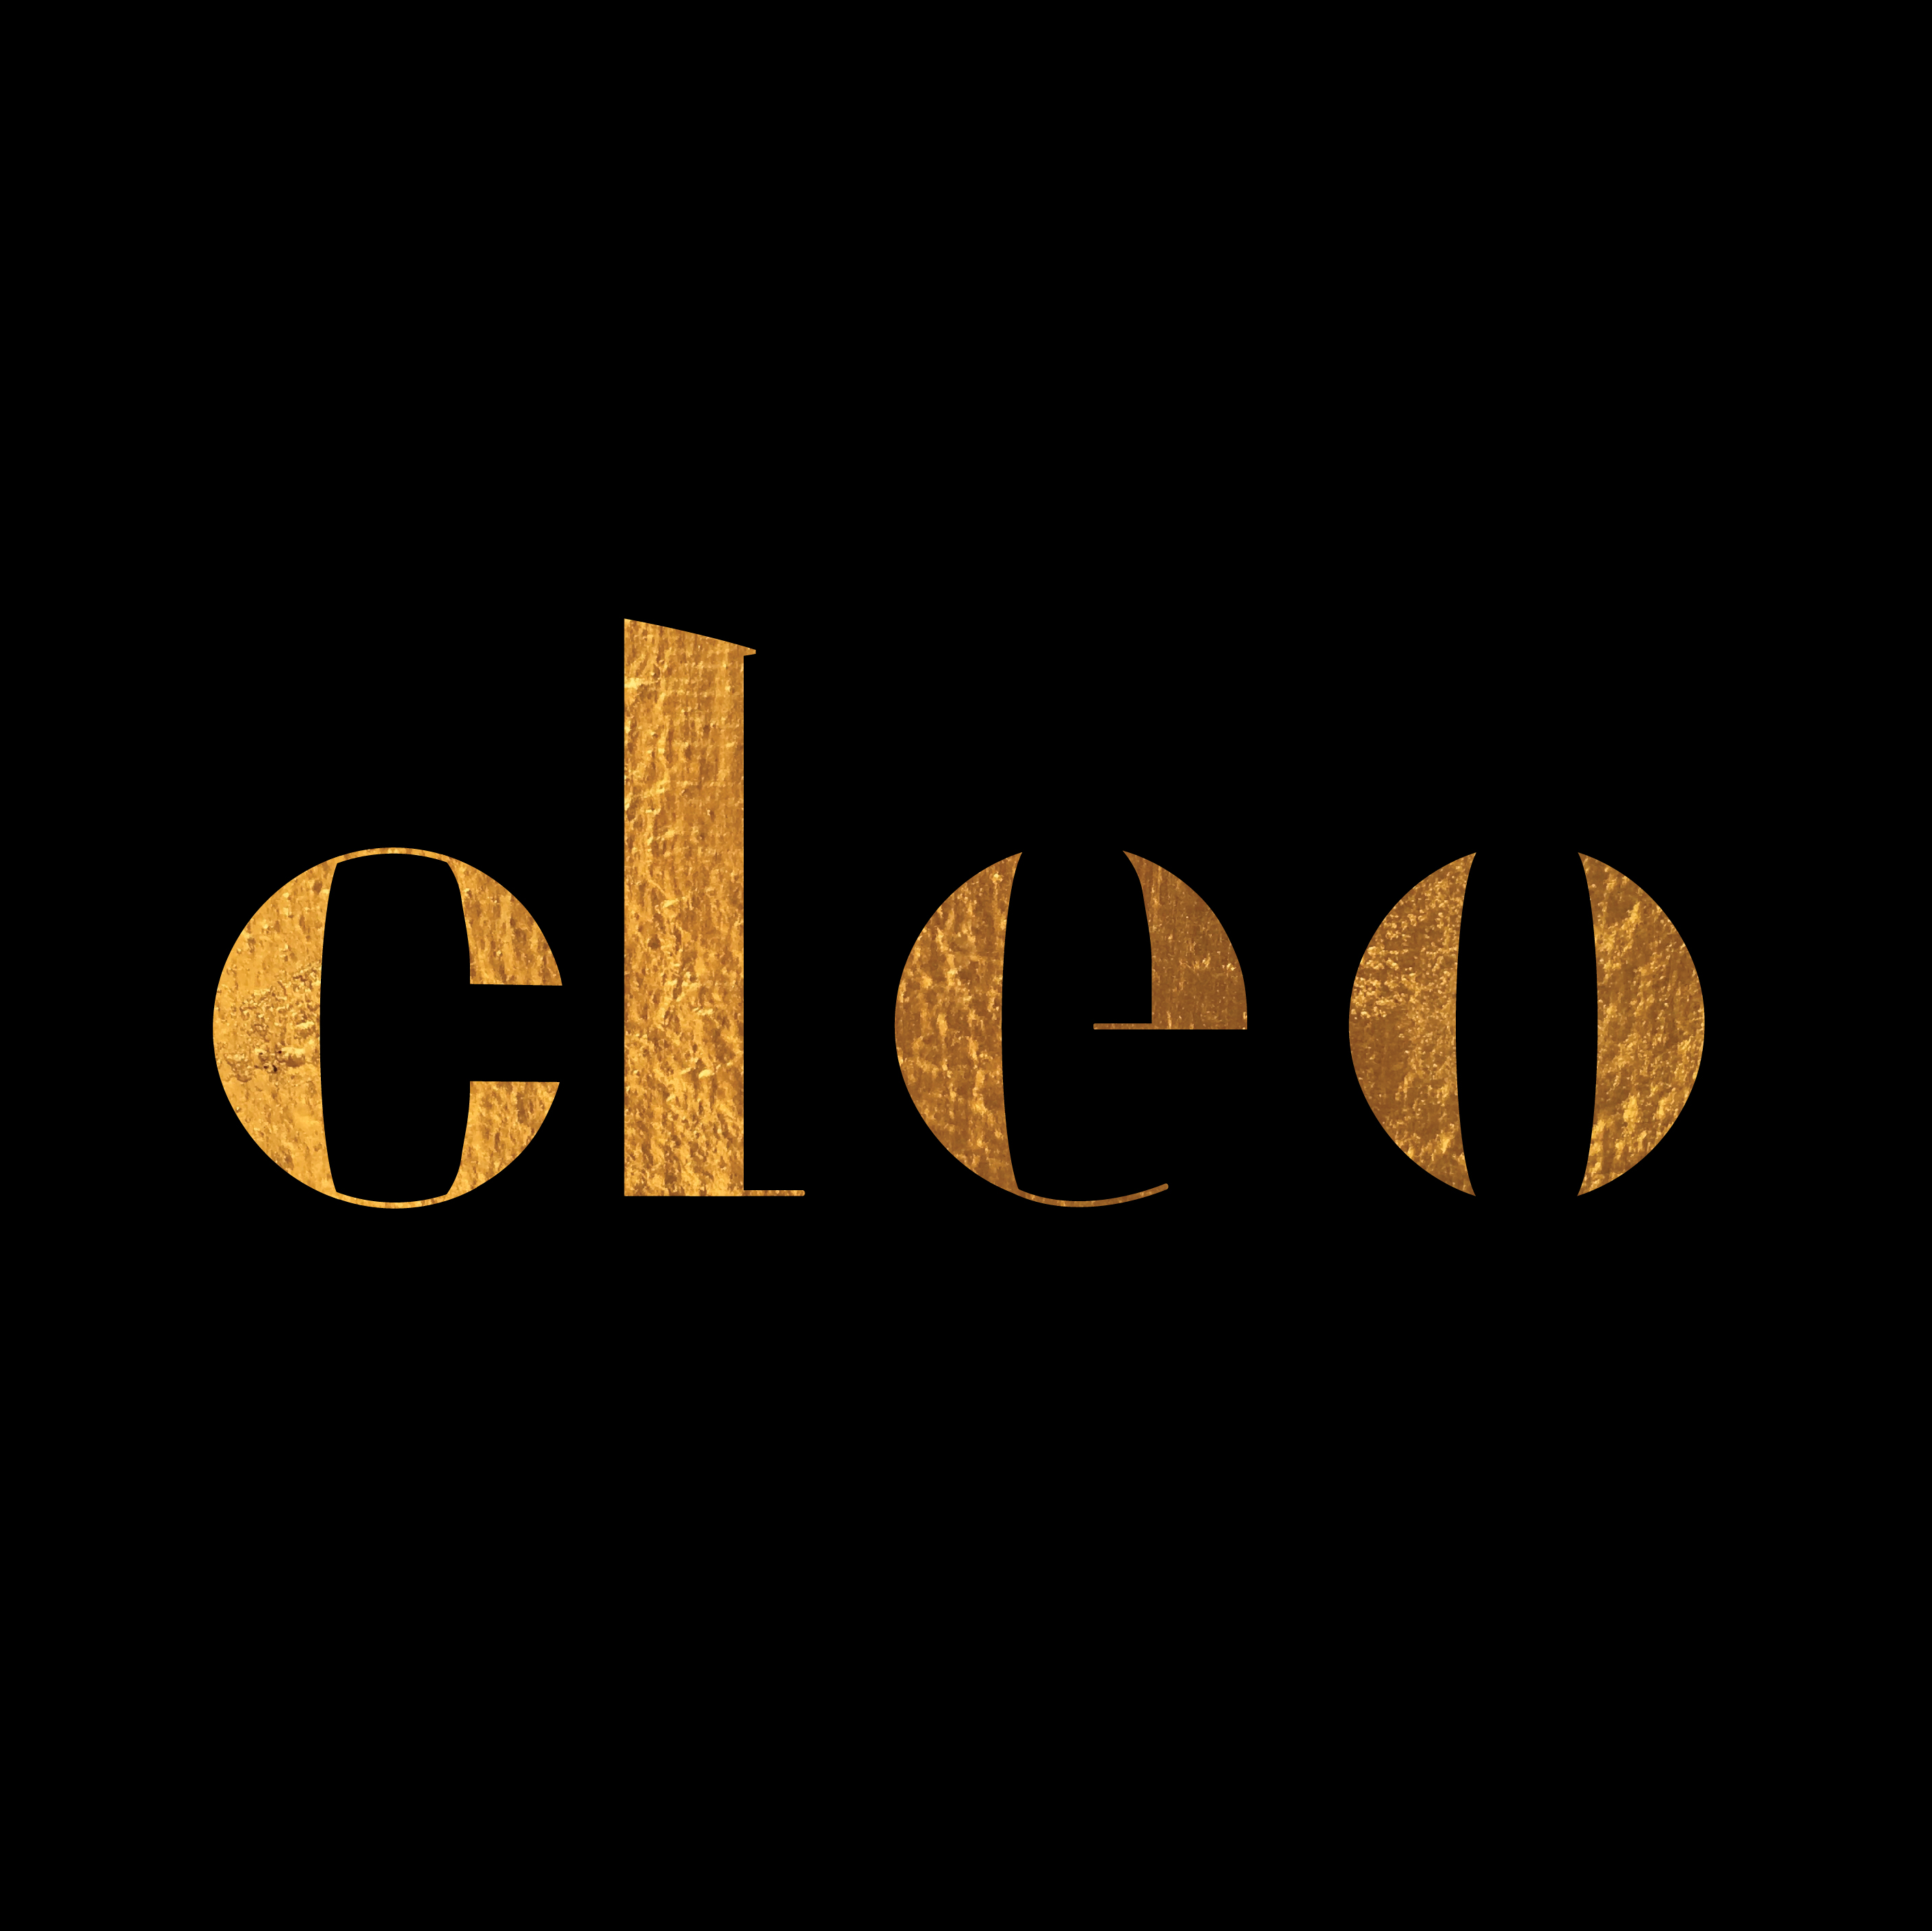 Black logo with Cleo written on it in gold